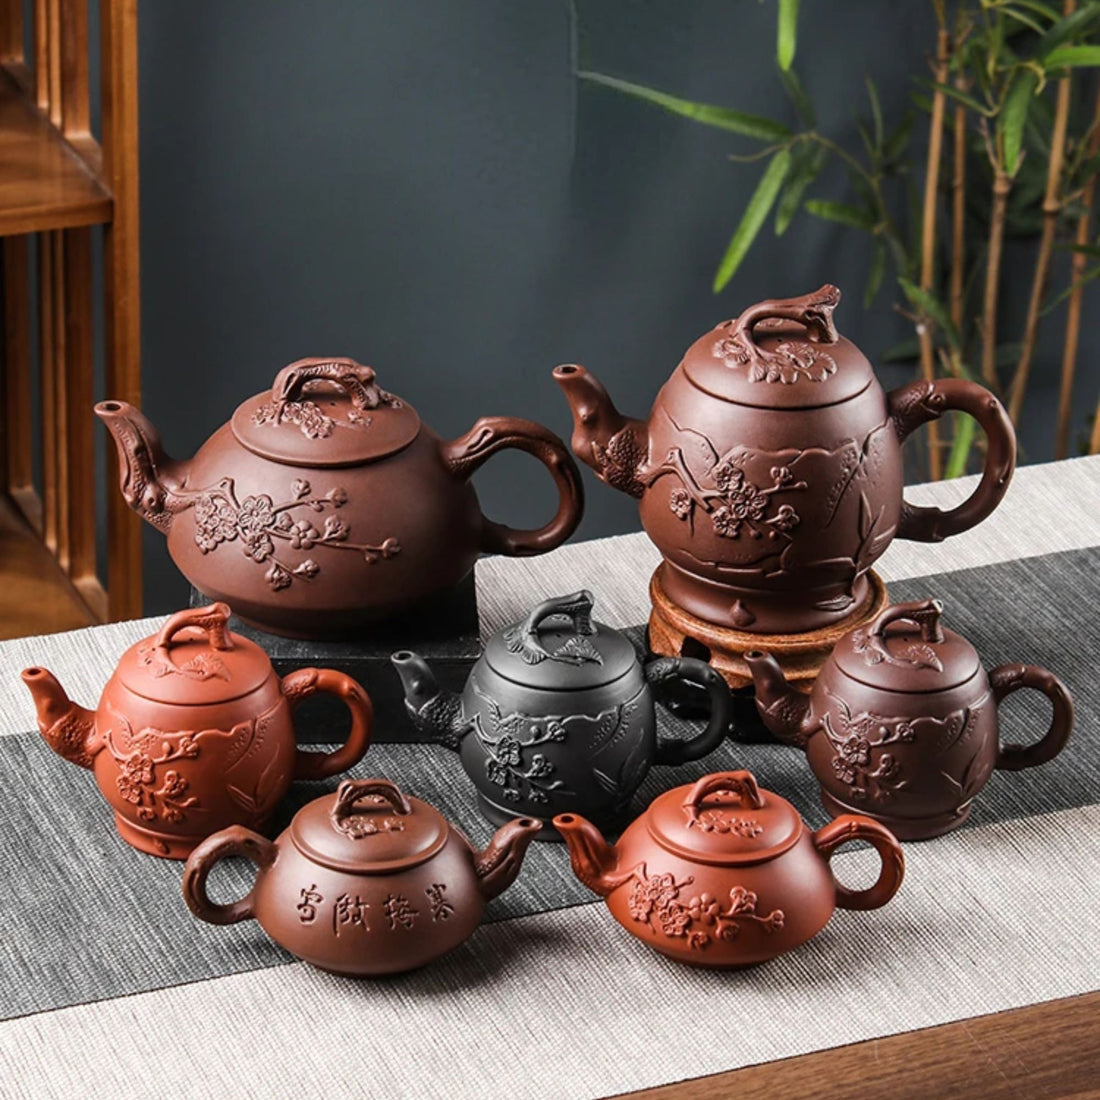 Why You Should Use a Yixing Teapot for Your Tea